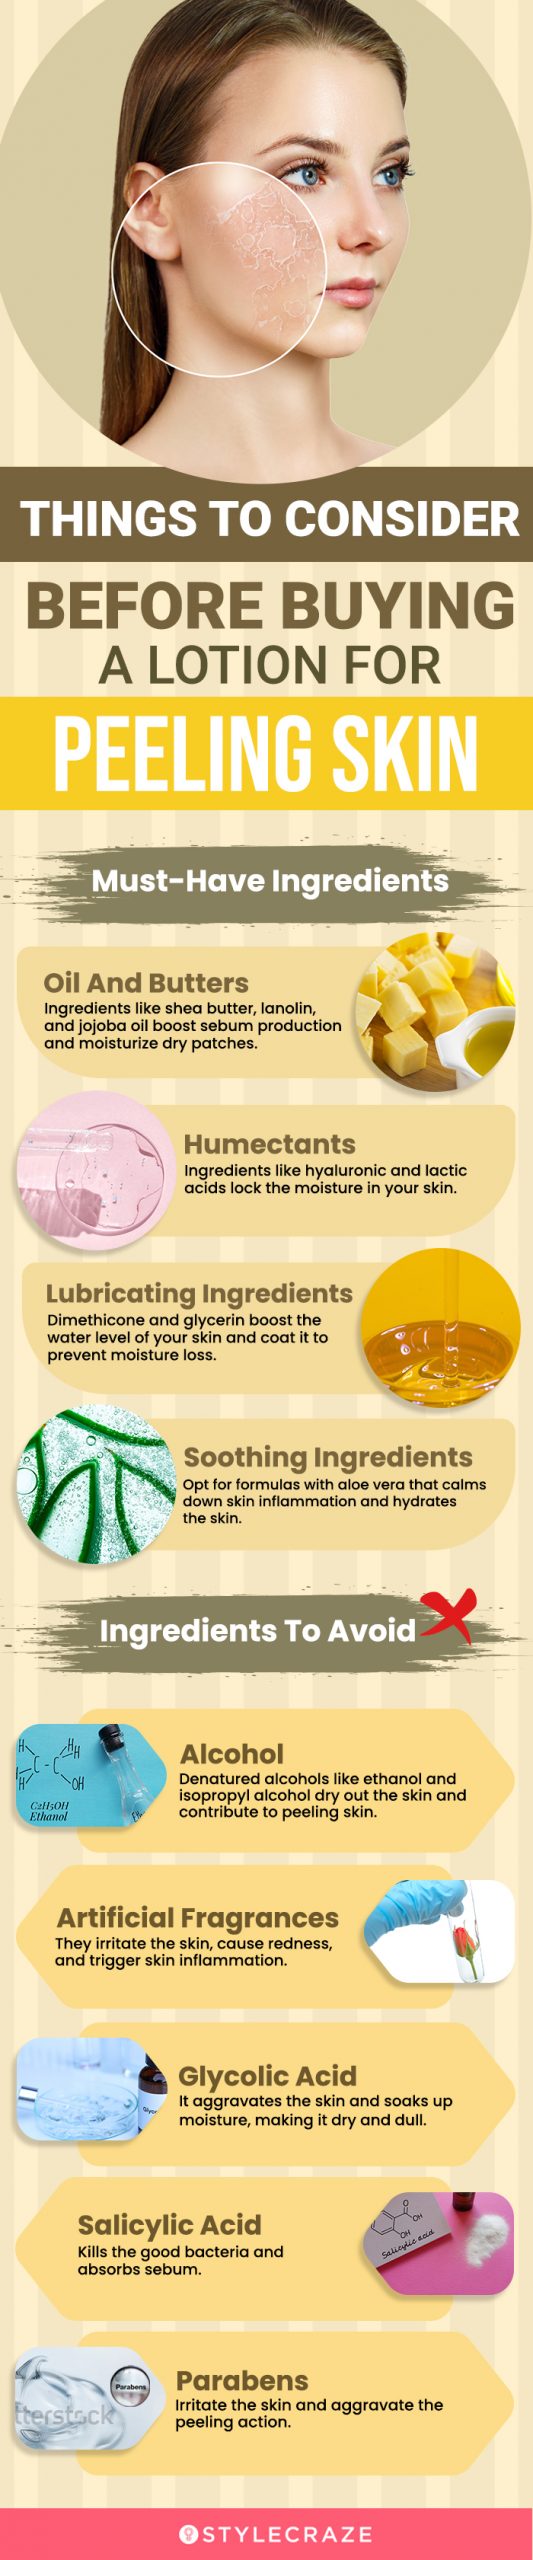 Things To Consider Before Buying A Lotion For Peeling Skin (infographic)